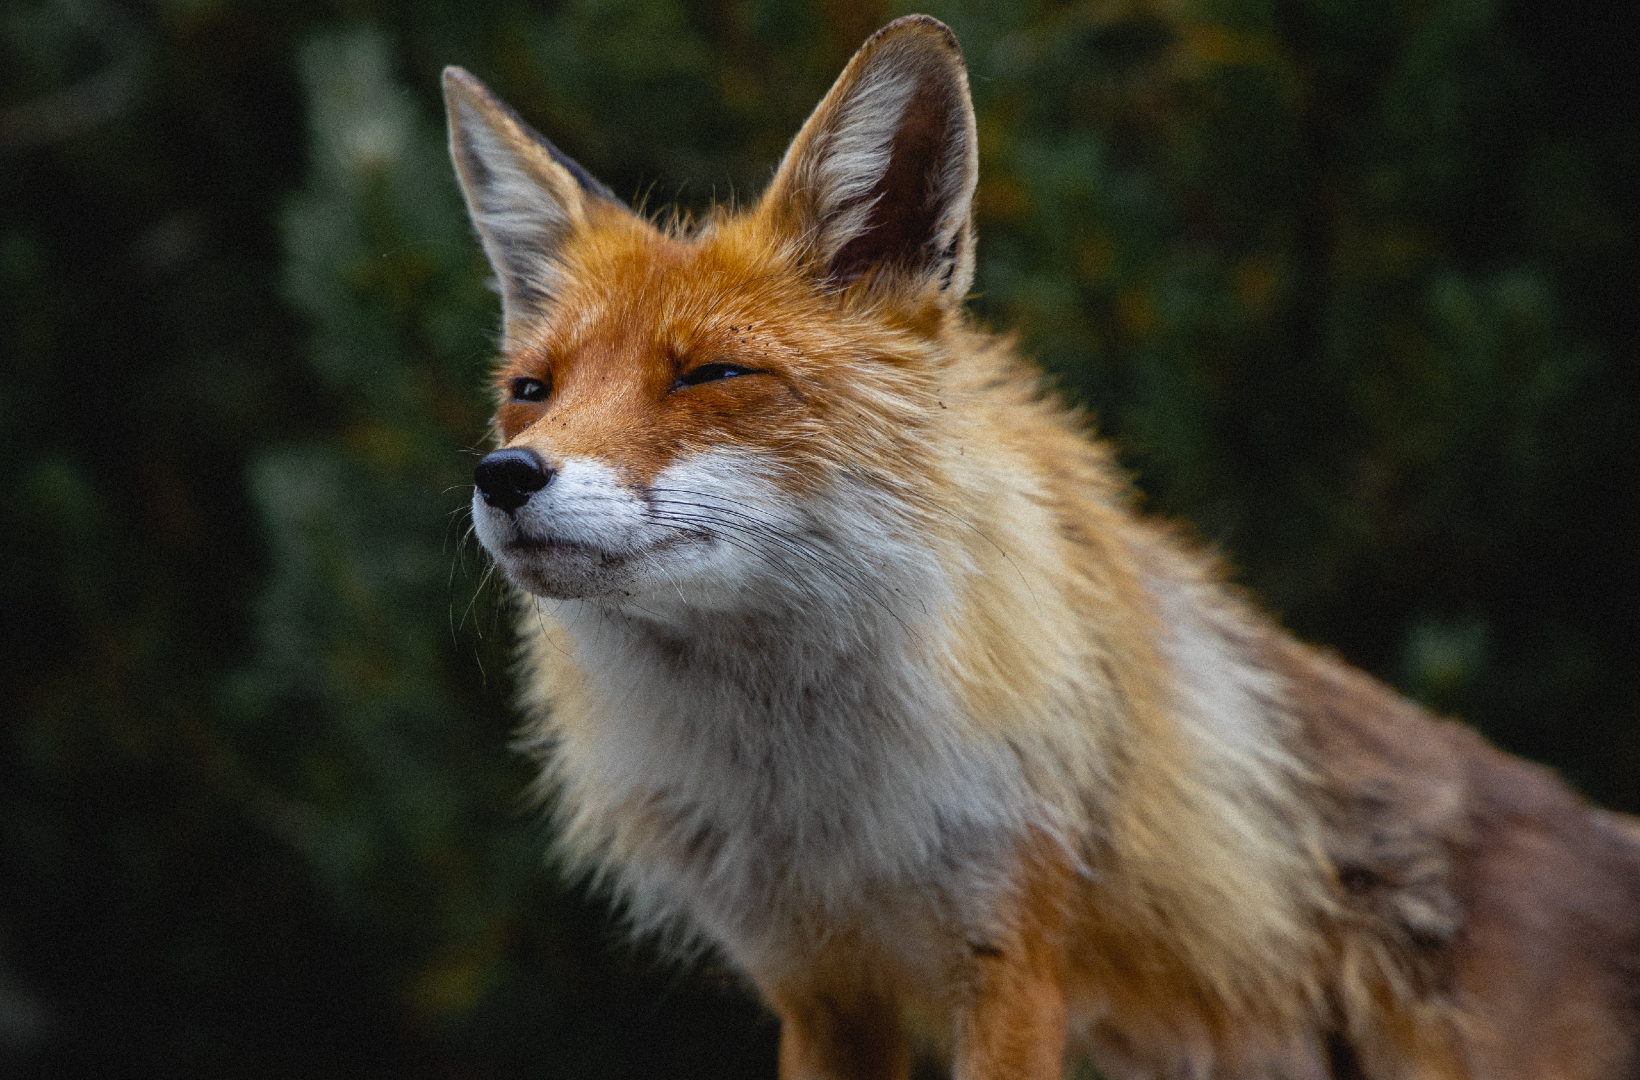 a close up of a fox's face with trees in the background, fox animal, red fox, portrait of an anthro fox, cute fox, stylised fox - like appearance, the lovely hairy fox, an anthropomorphic fox, foxes, female fox, tonic the fox, a beautiful fox lady, anthropomorphic fox, looking to the side off camera